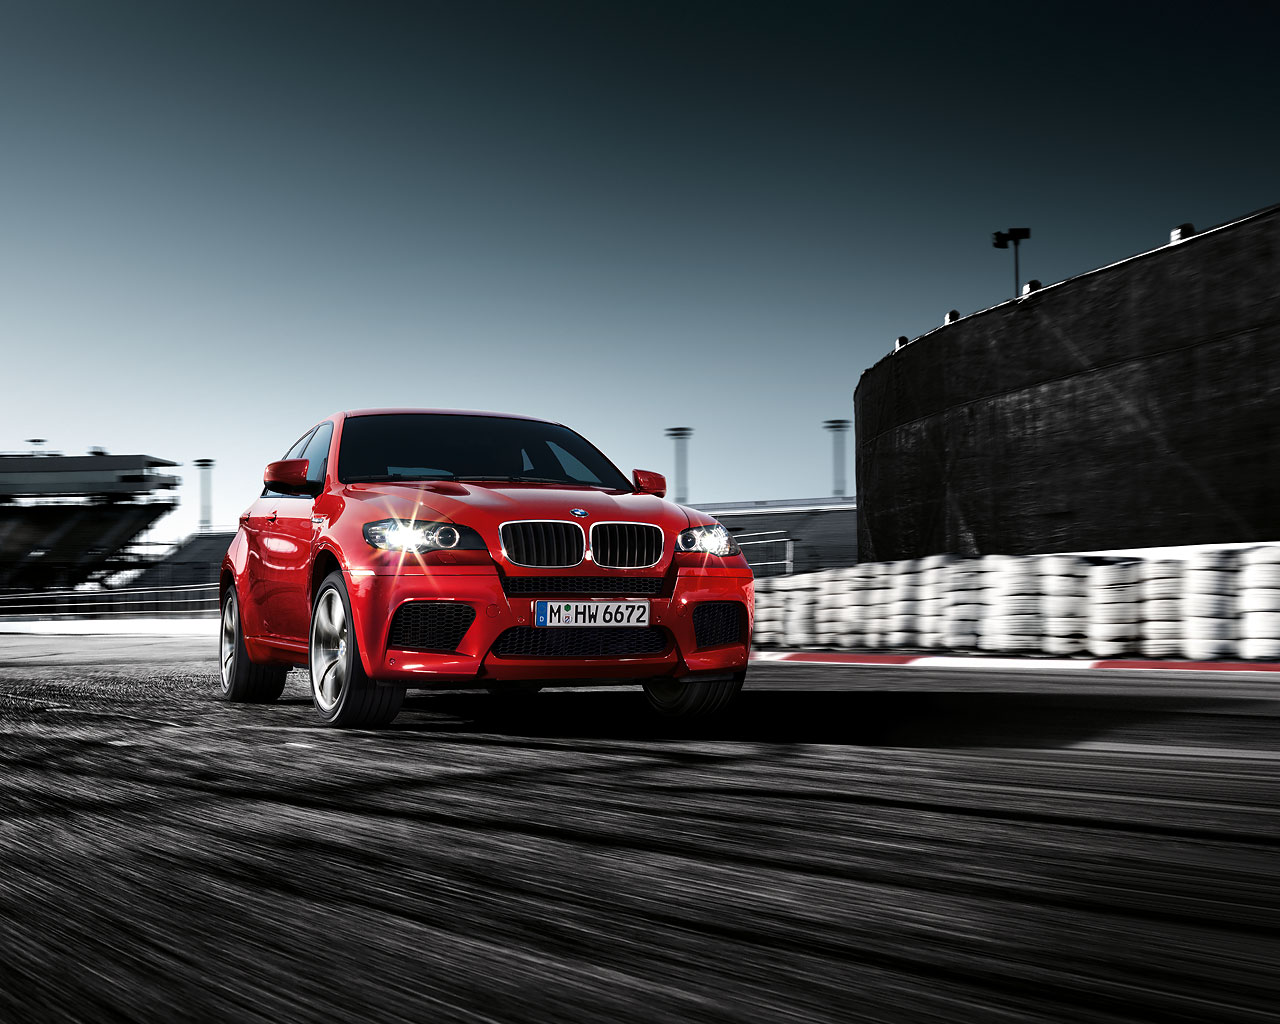 Bmw X6 Wallpaper High Resolution Pictures In Definition